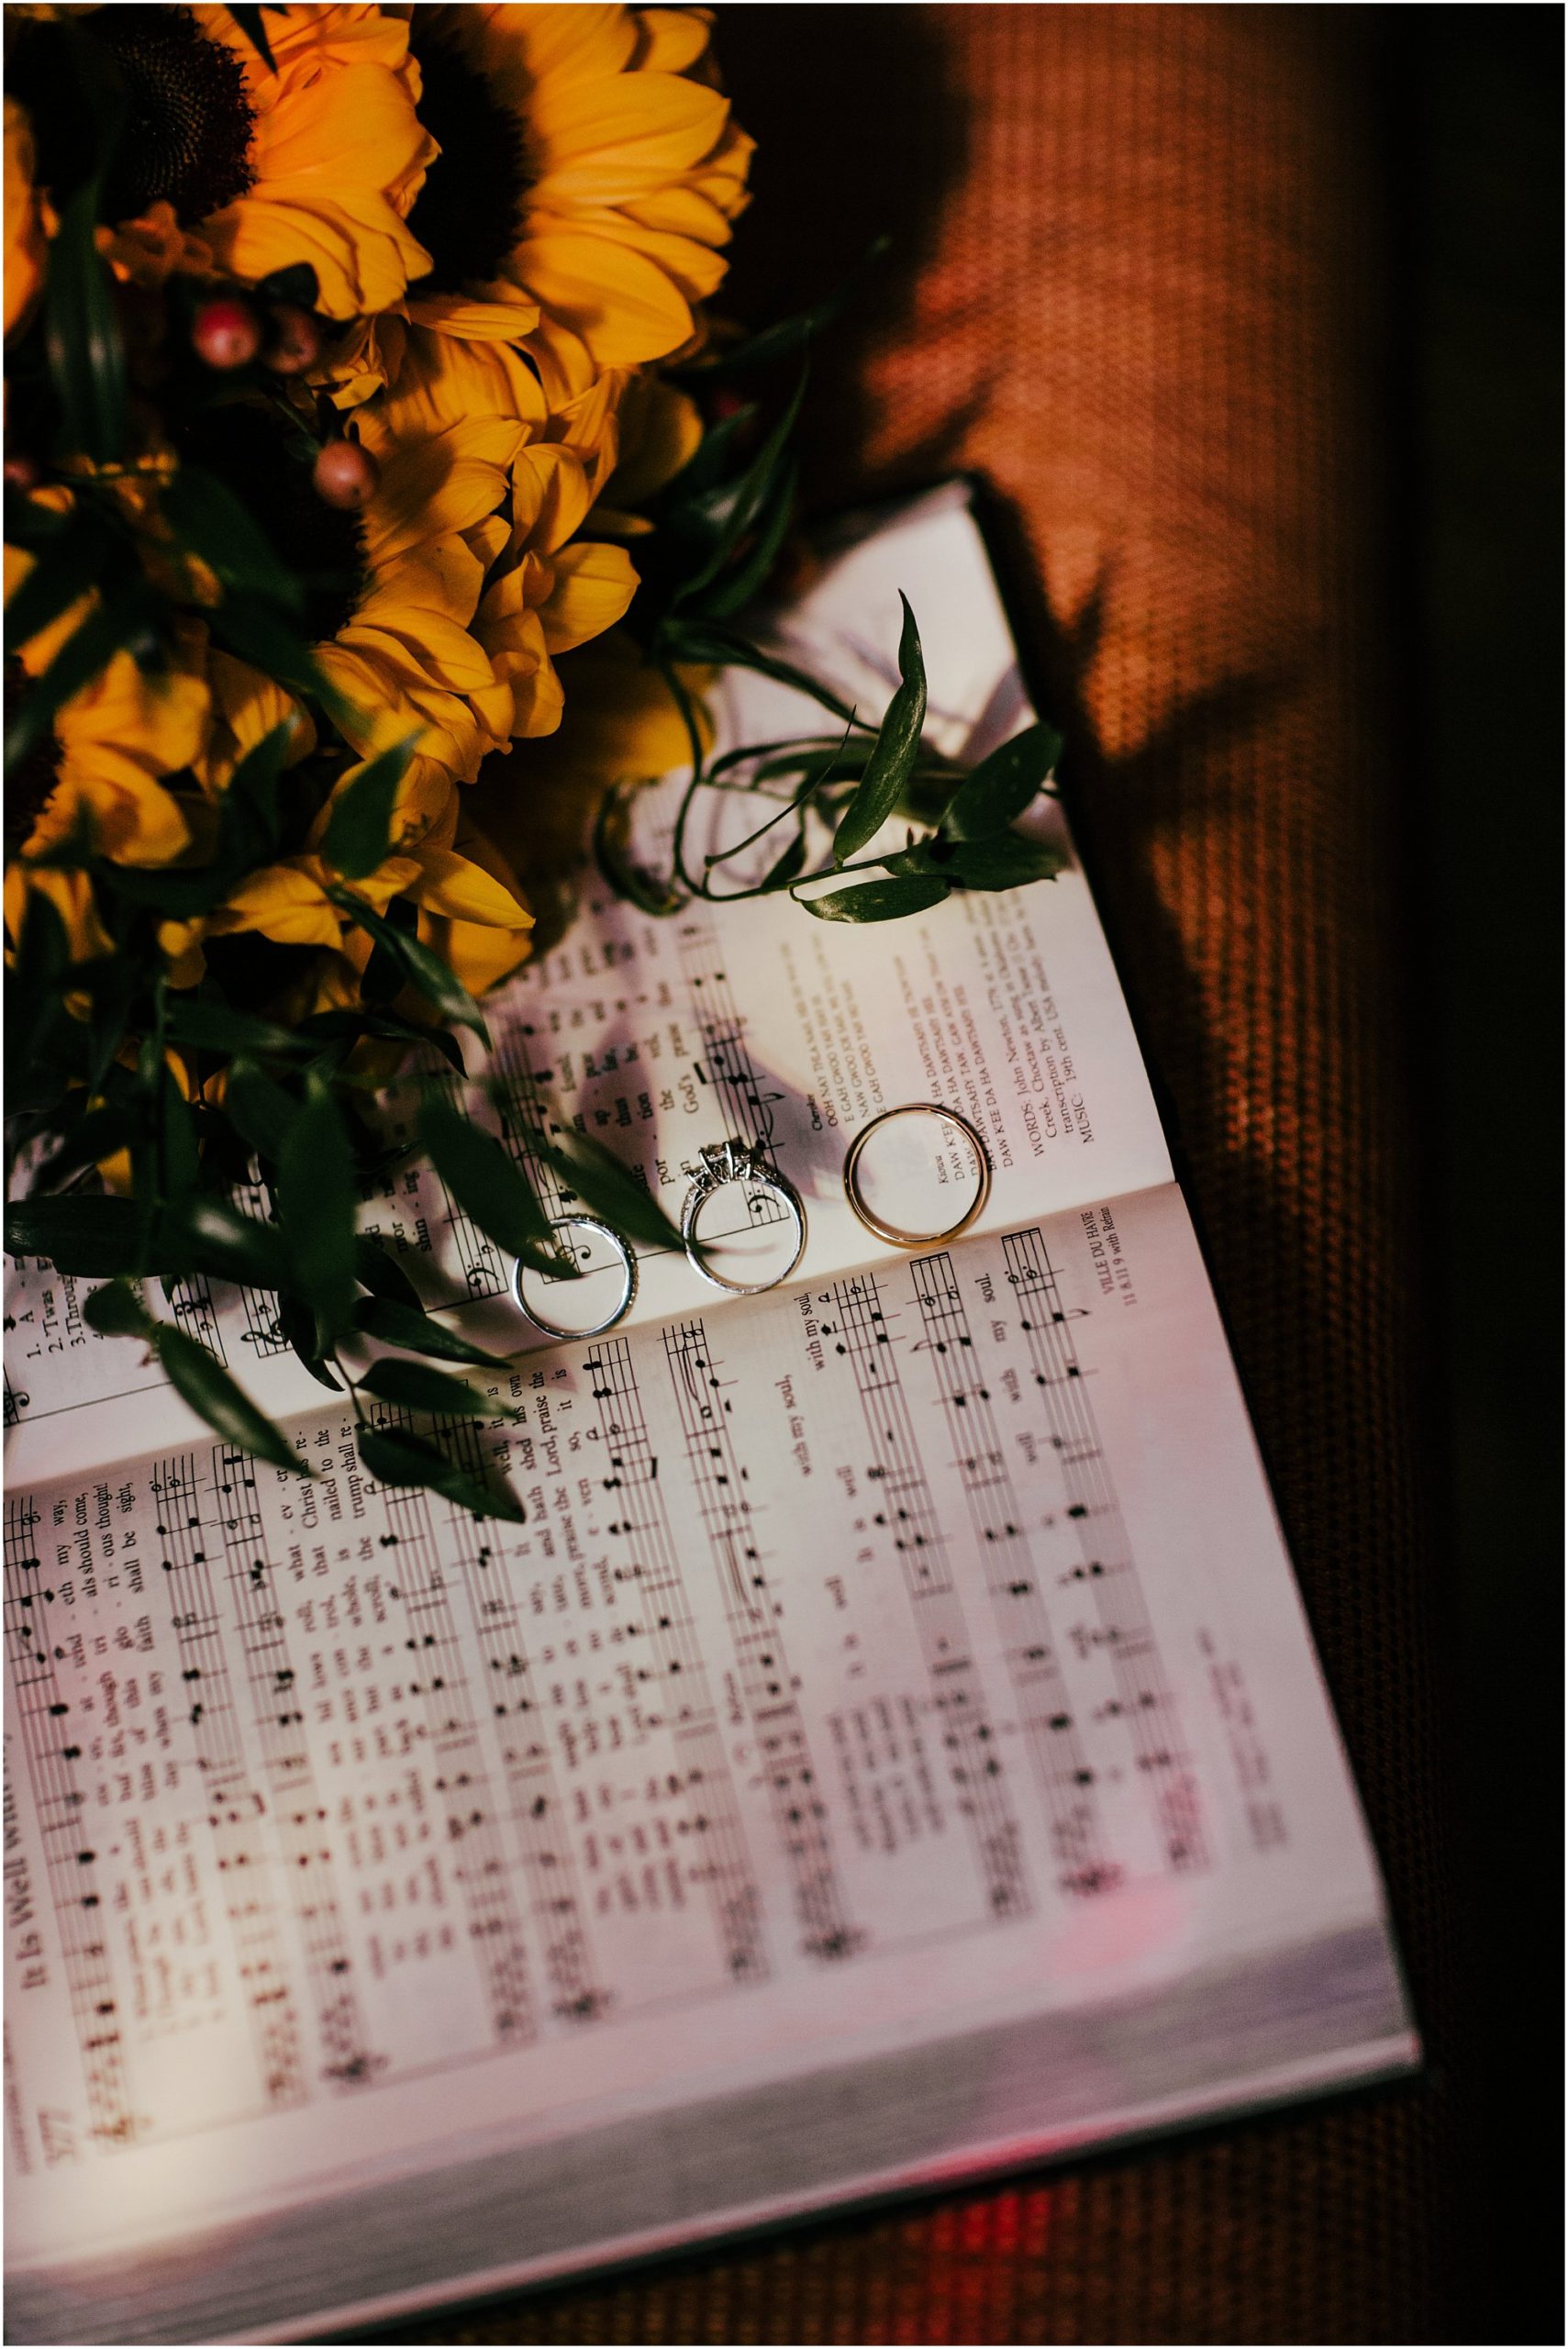 wedding rings laying on open hymnal